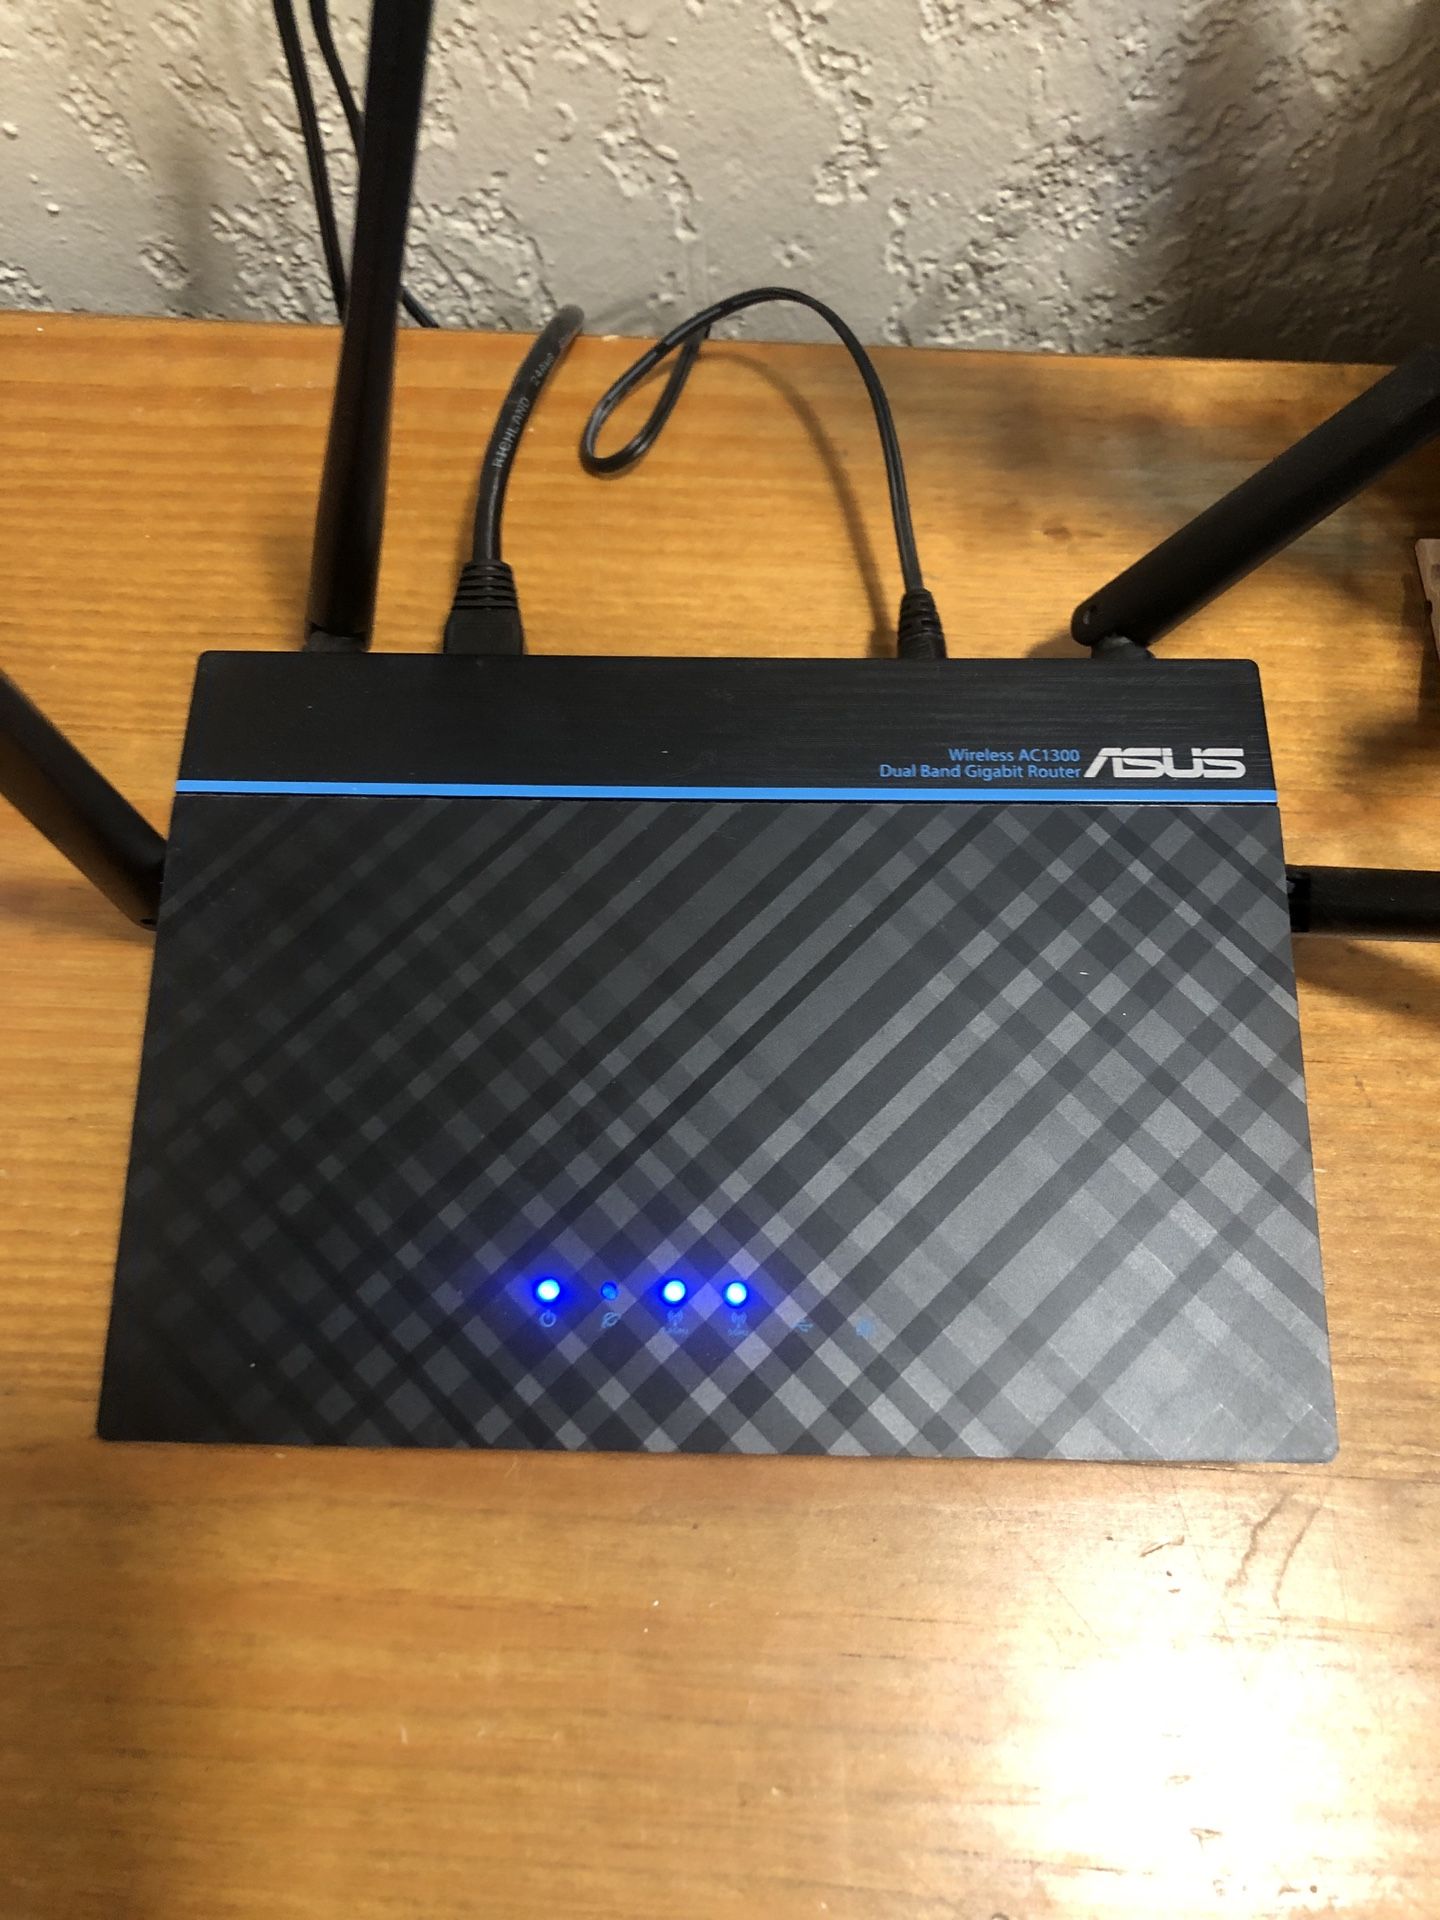 Arris Surfboard SB6183 & ASUS AC1300 Dual Band Router